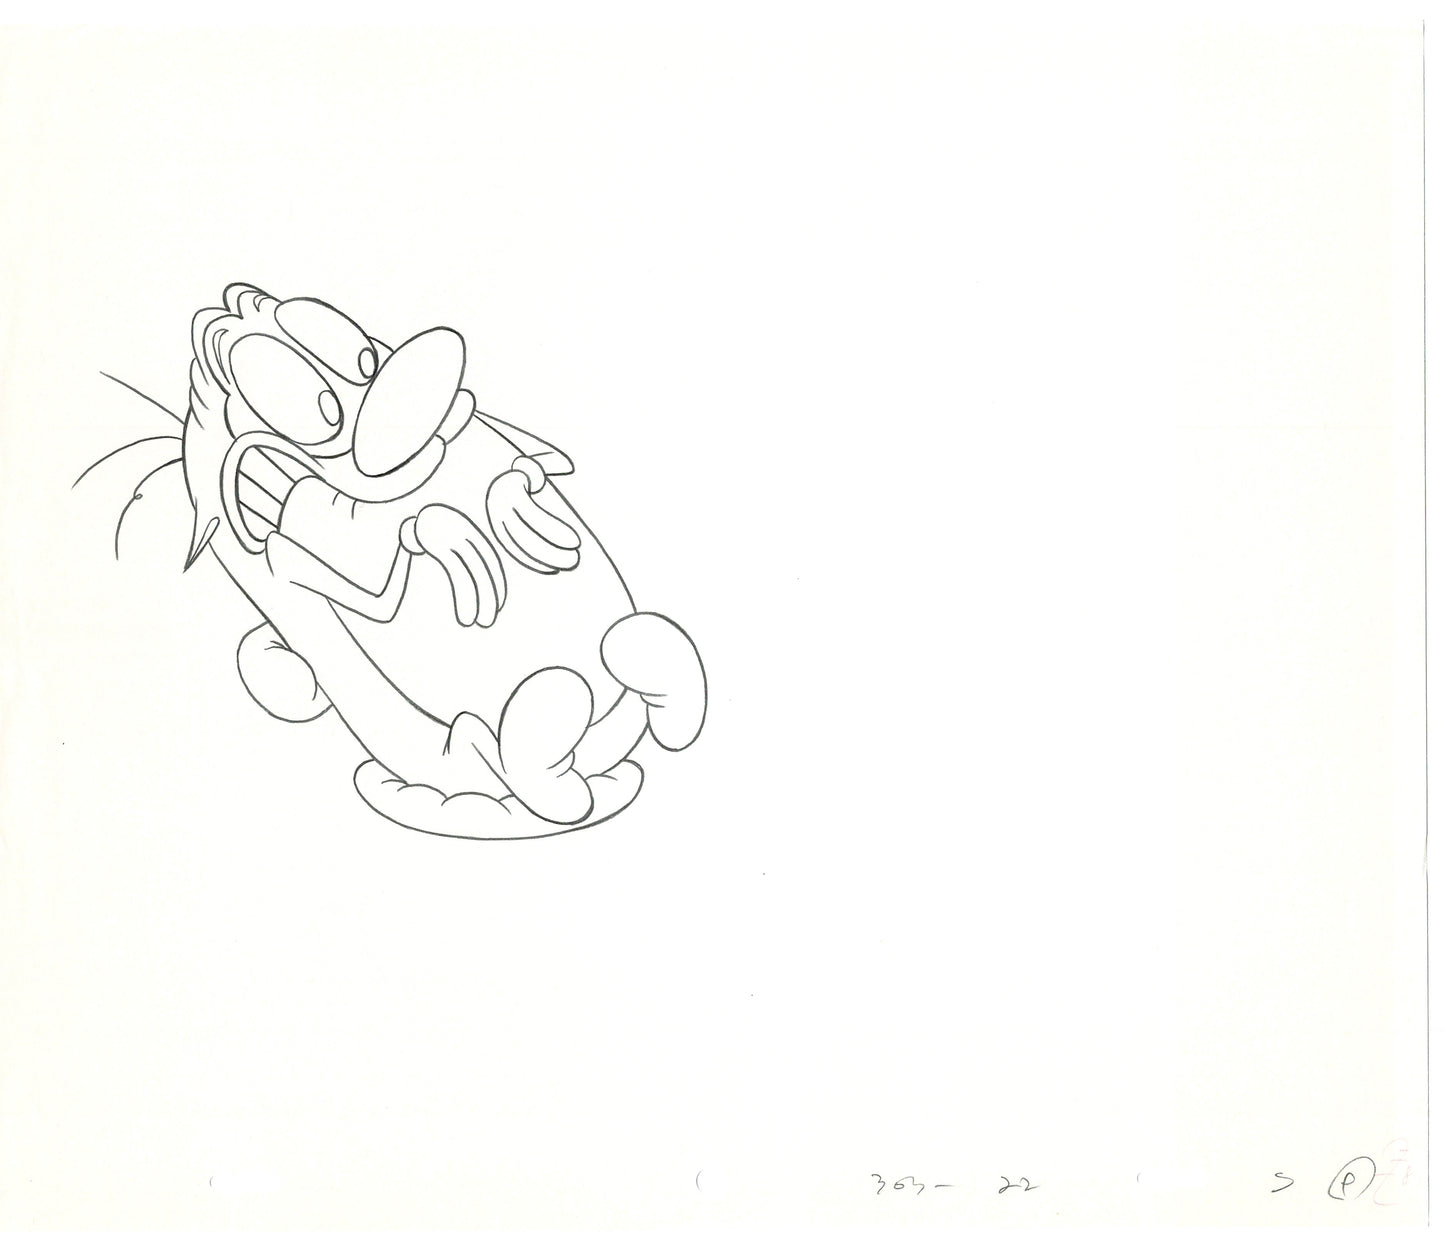 Ren and Stimpy Production Animation Cel Drawing Nickelodeon 1994 B-02